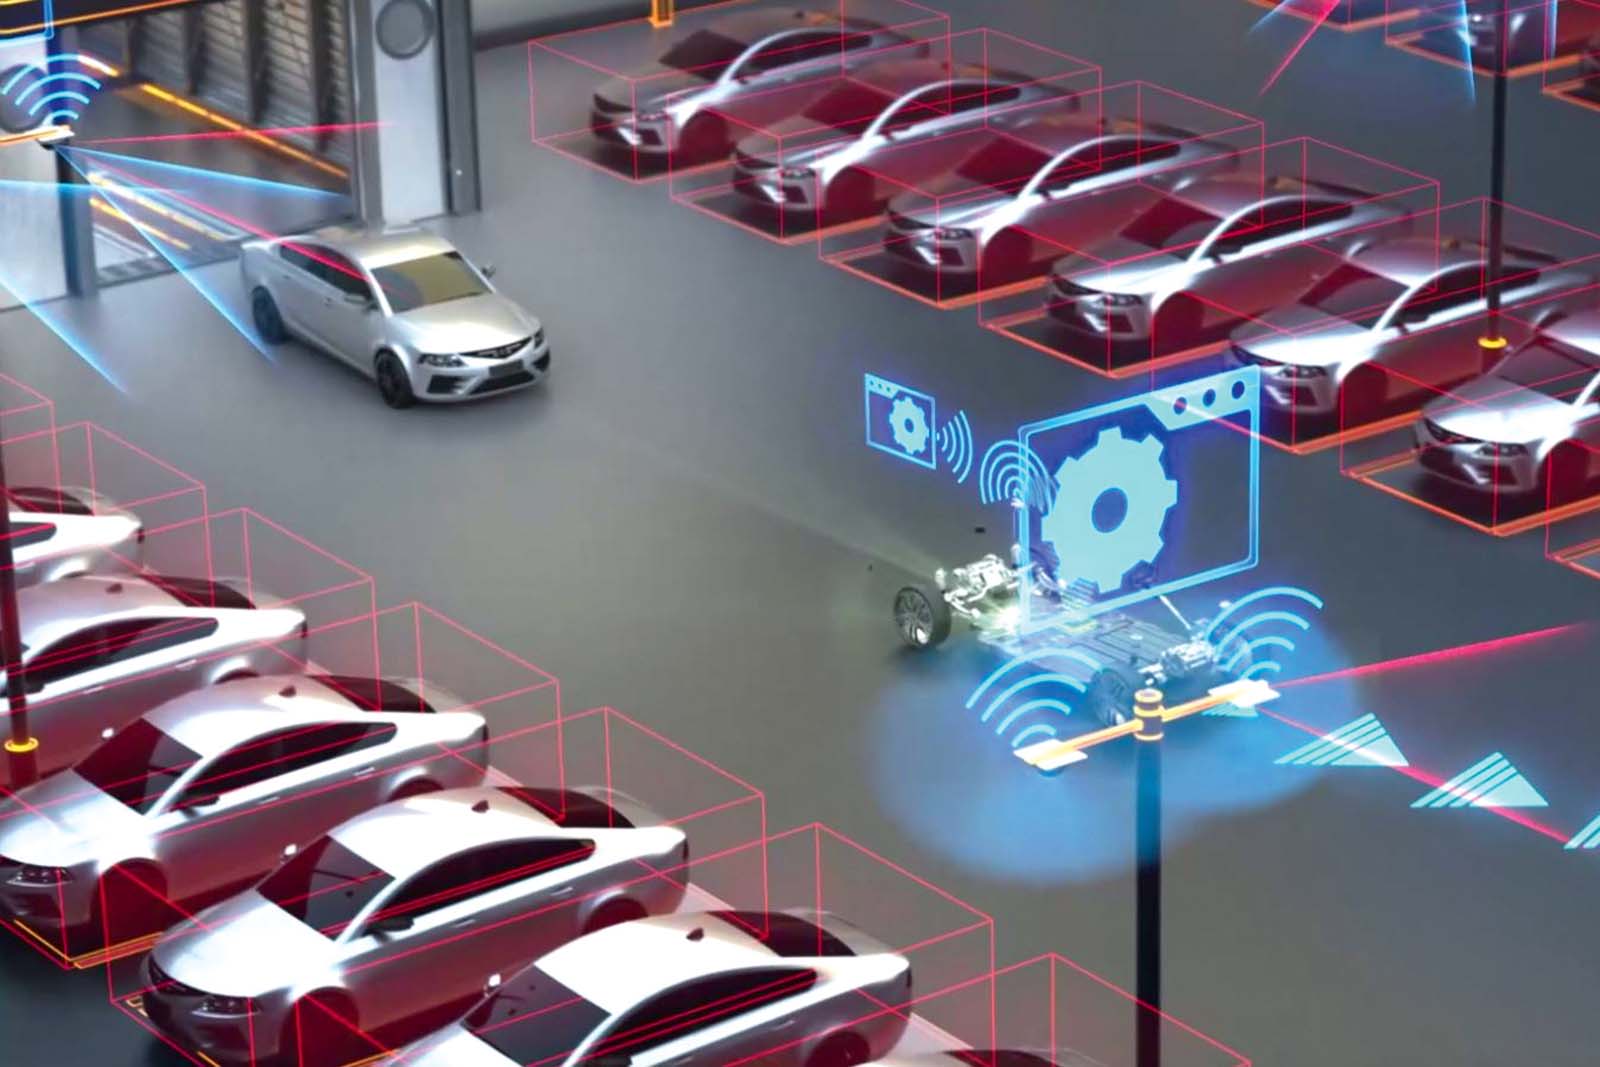 Self-driving cars mean you could valet park everyday